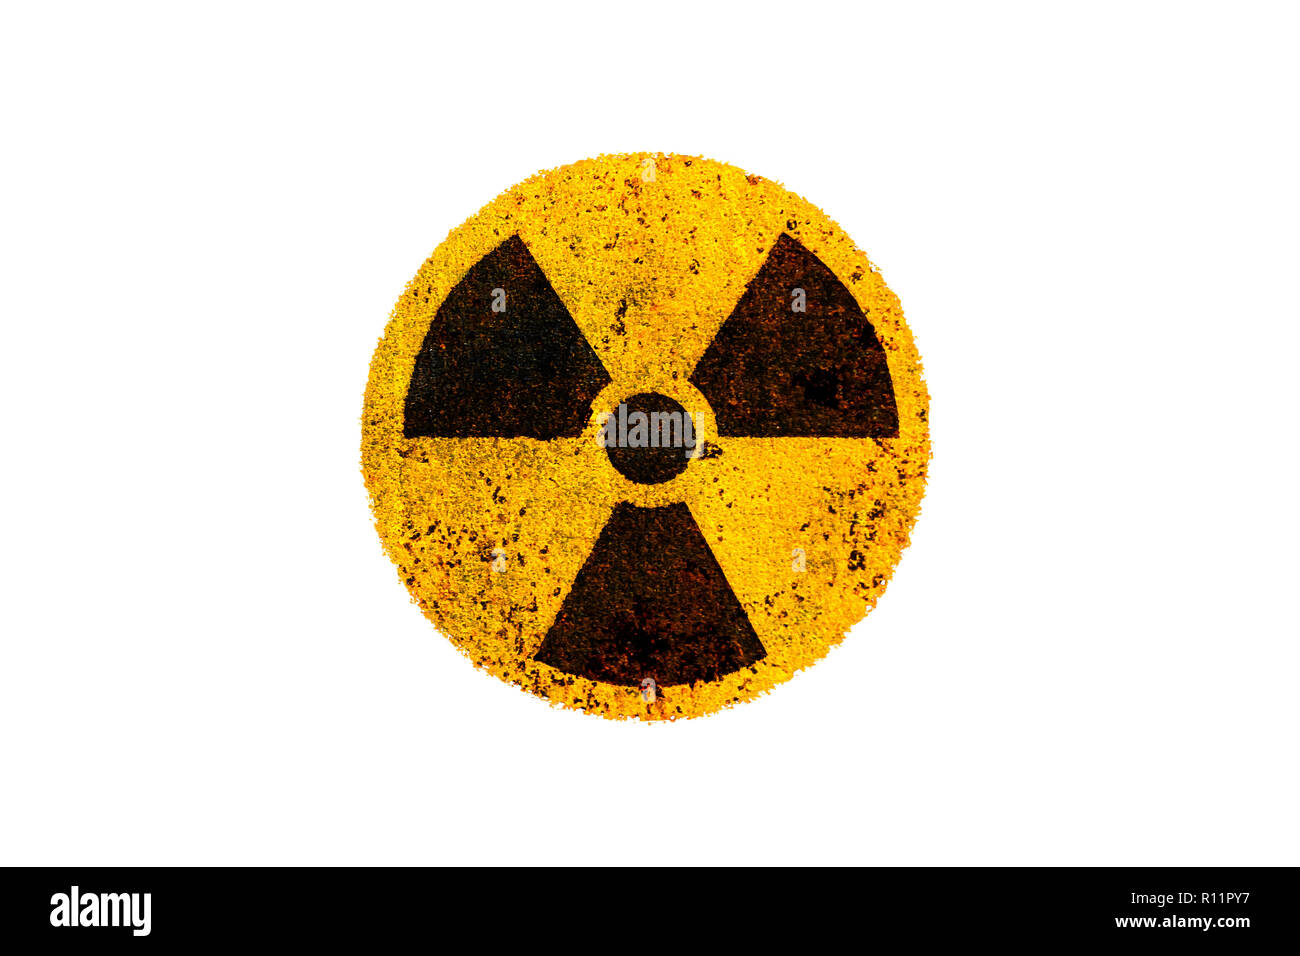 Round yellow and black radioactive (ionizing radiation) nuclear danger symbol on rusty metal grungy texture and isolated on white background. Stock Photo